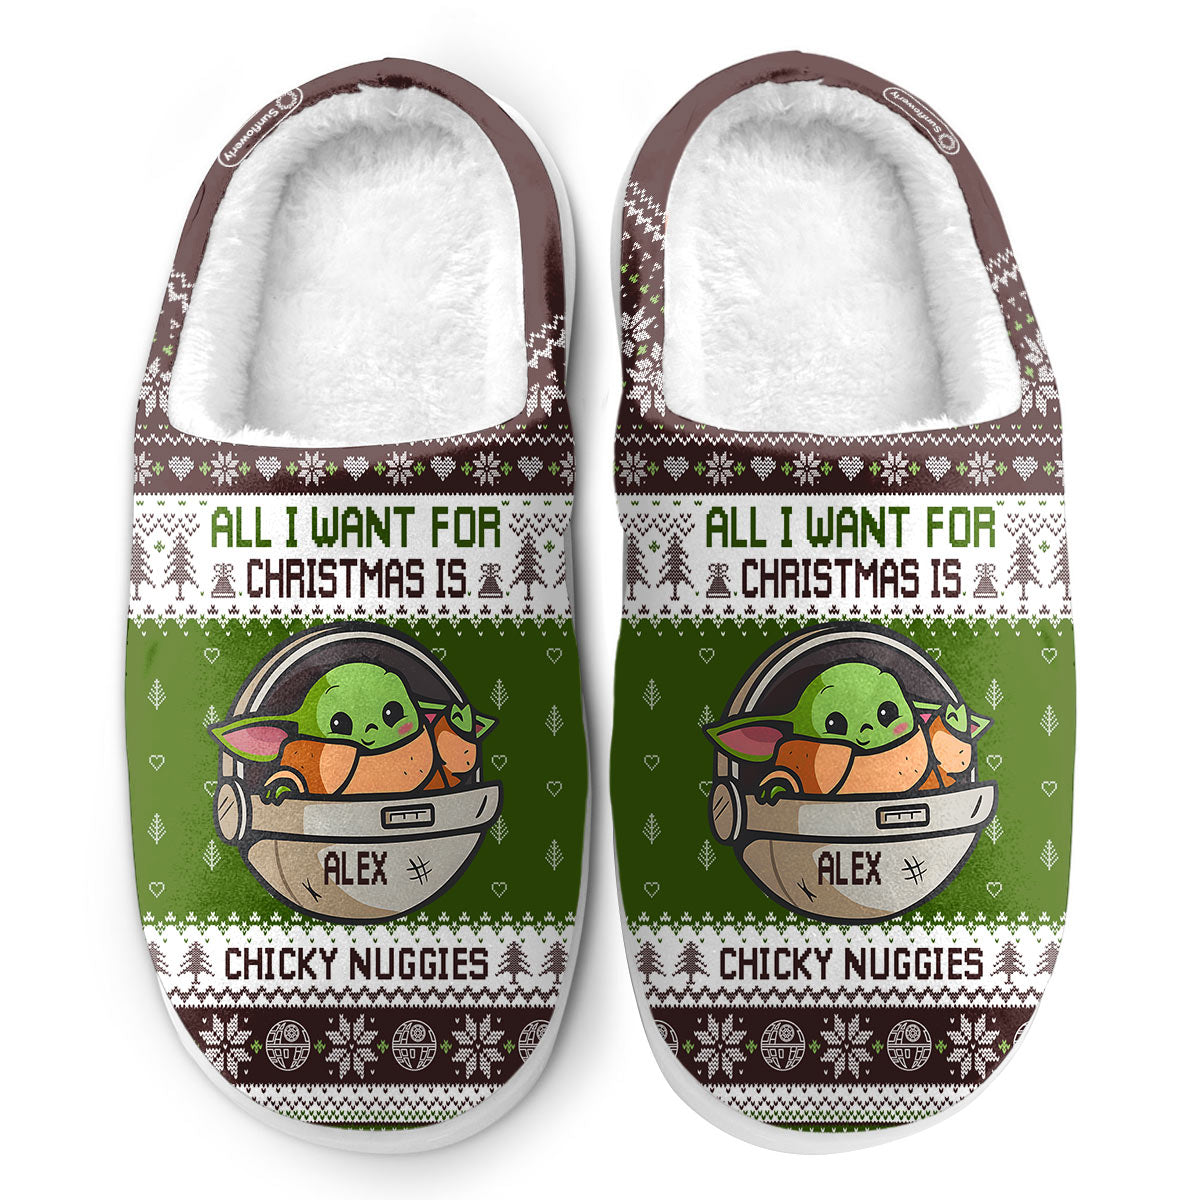 All I Want For Christmas Is Chicky Nuggies - Personalized The Force Slippers